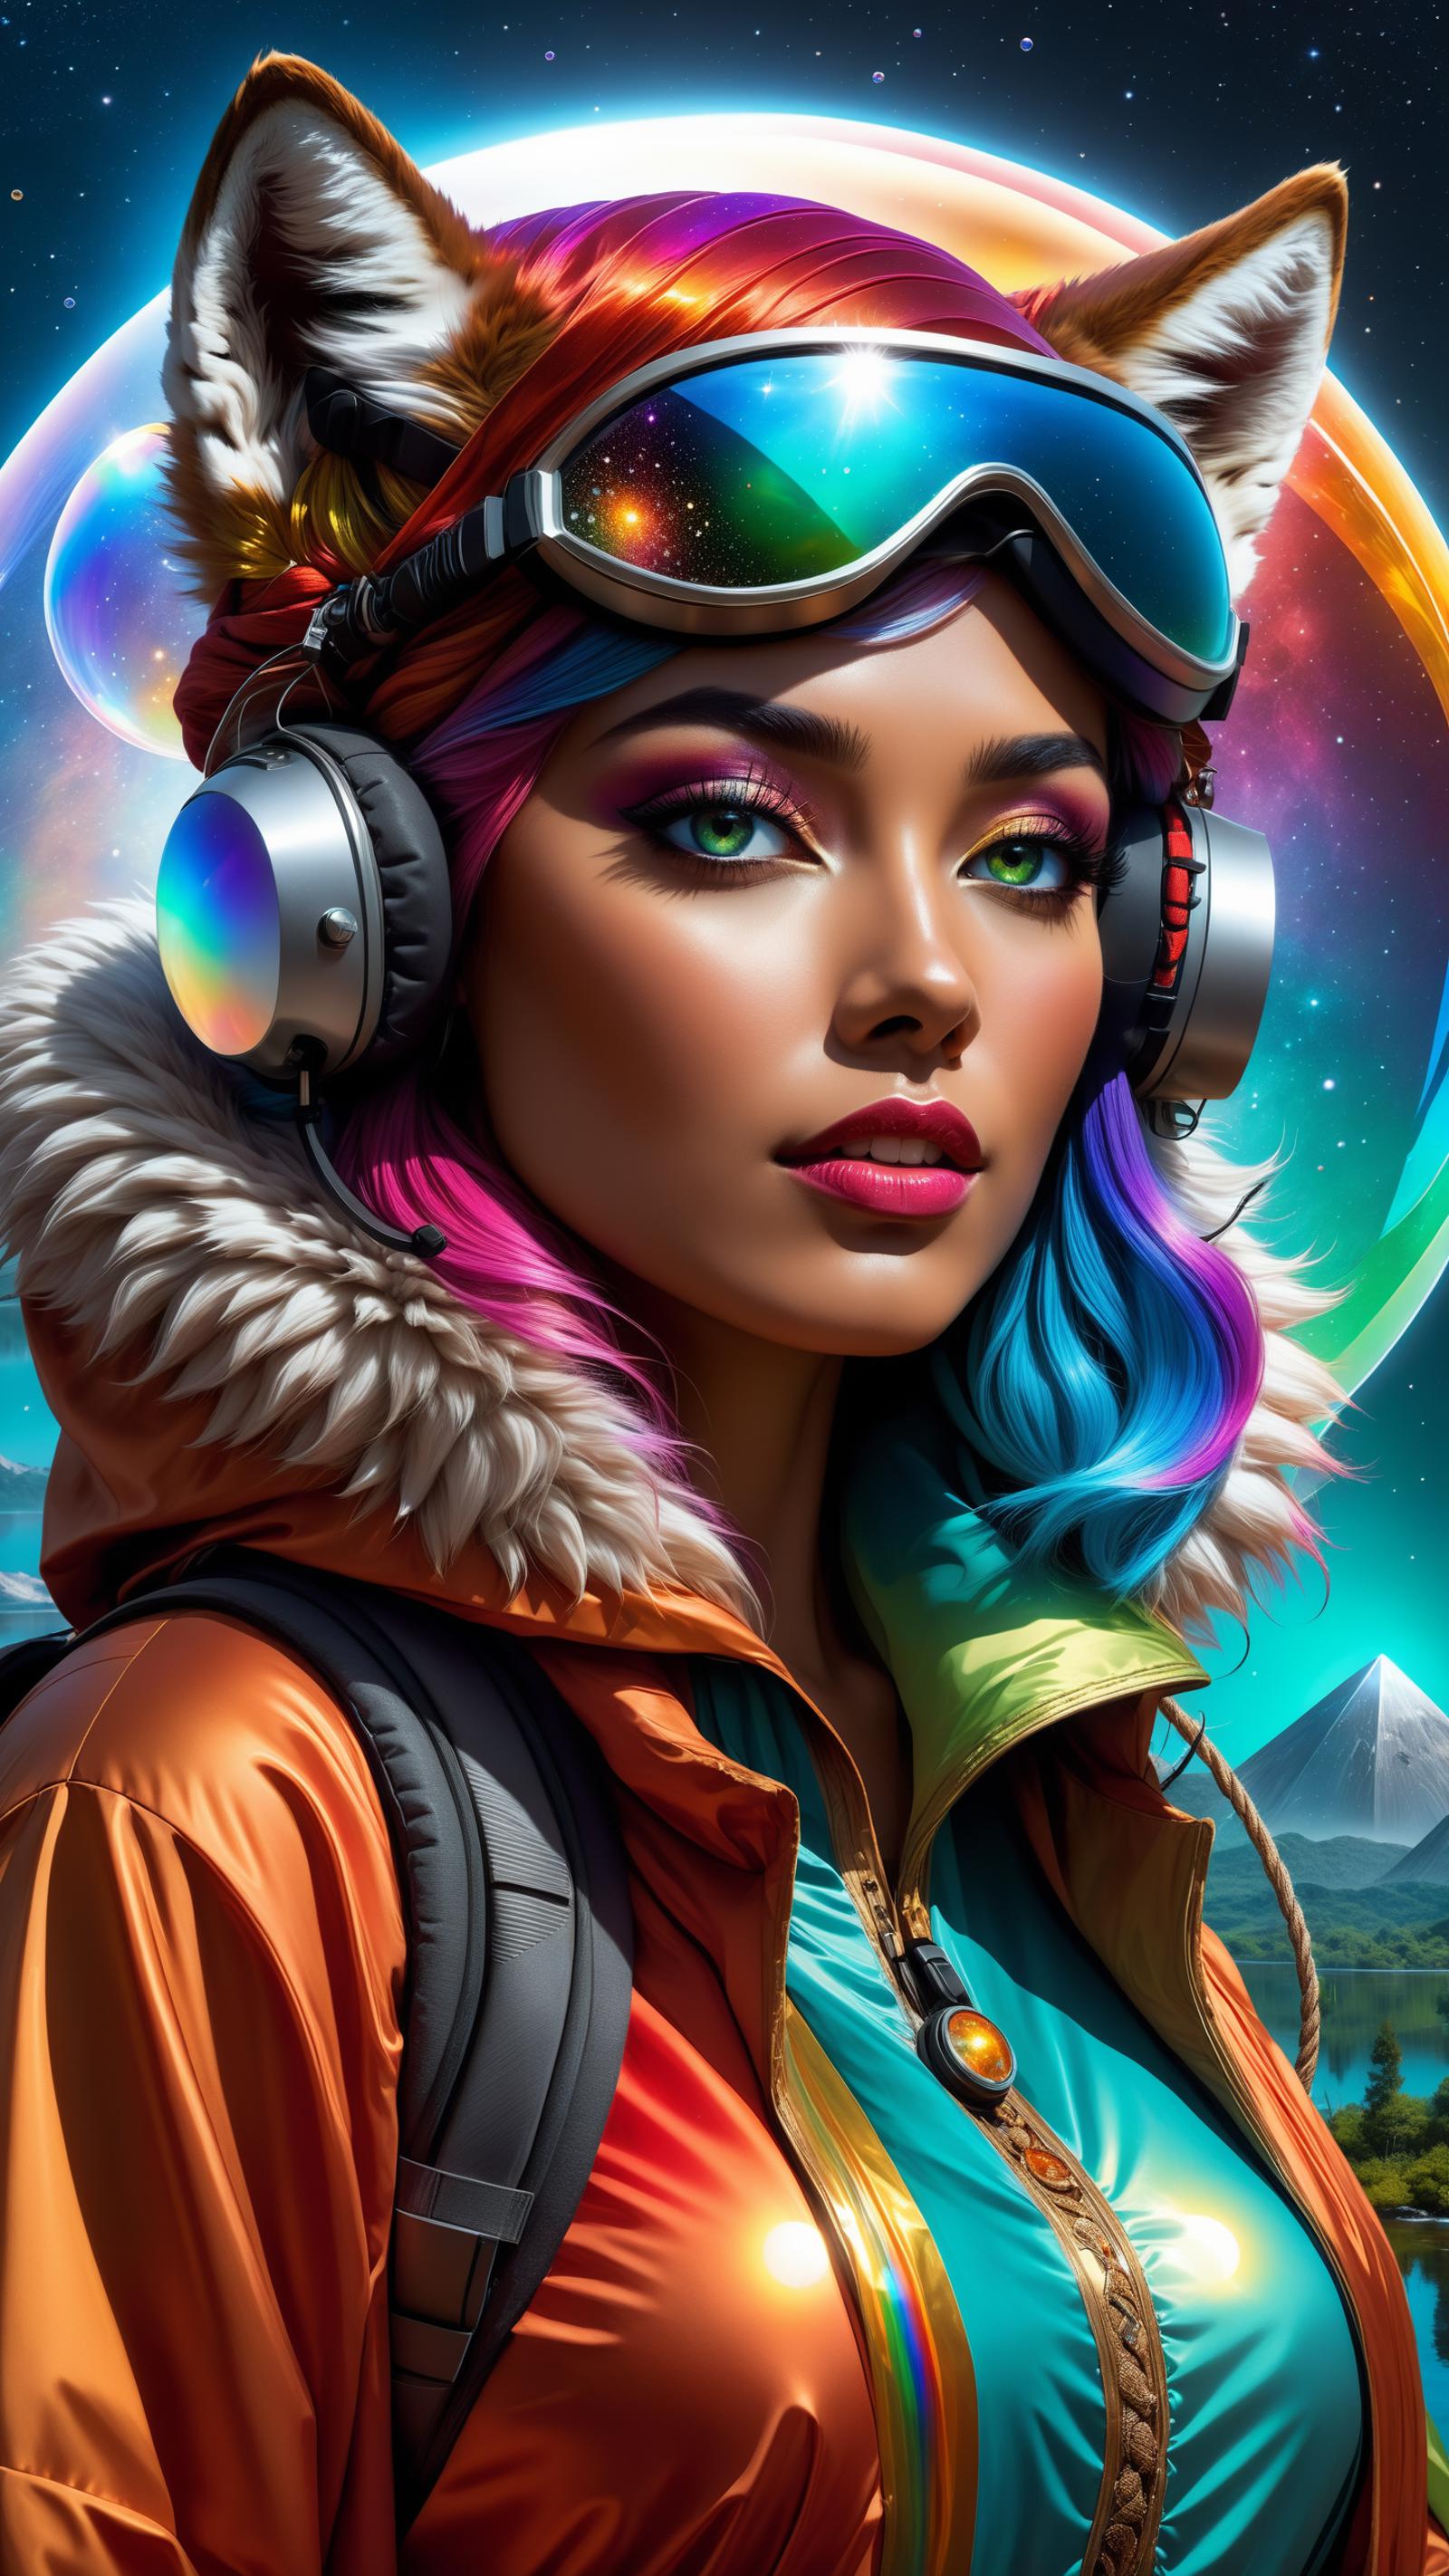 Digital Art of a Woman in a Vibrant Outfit, Wearing Headphones and Goggles.